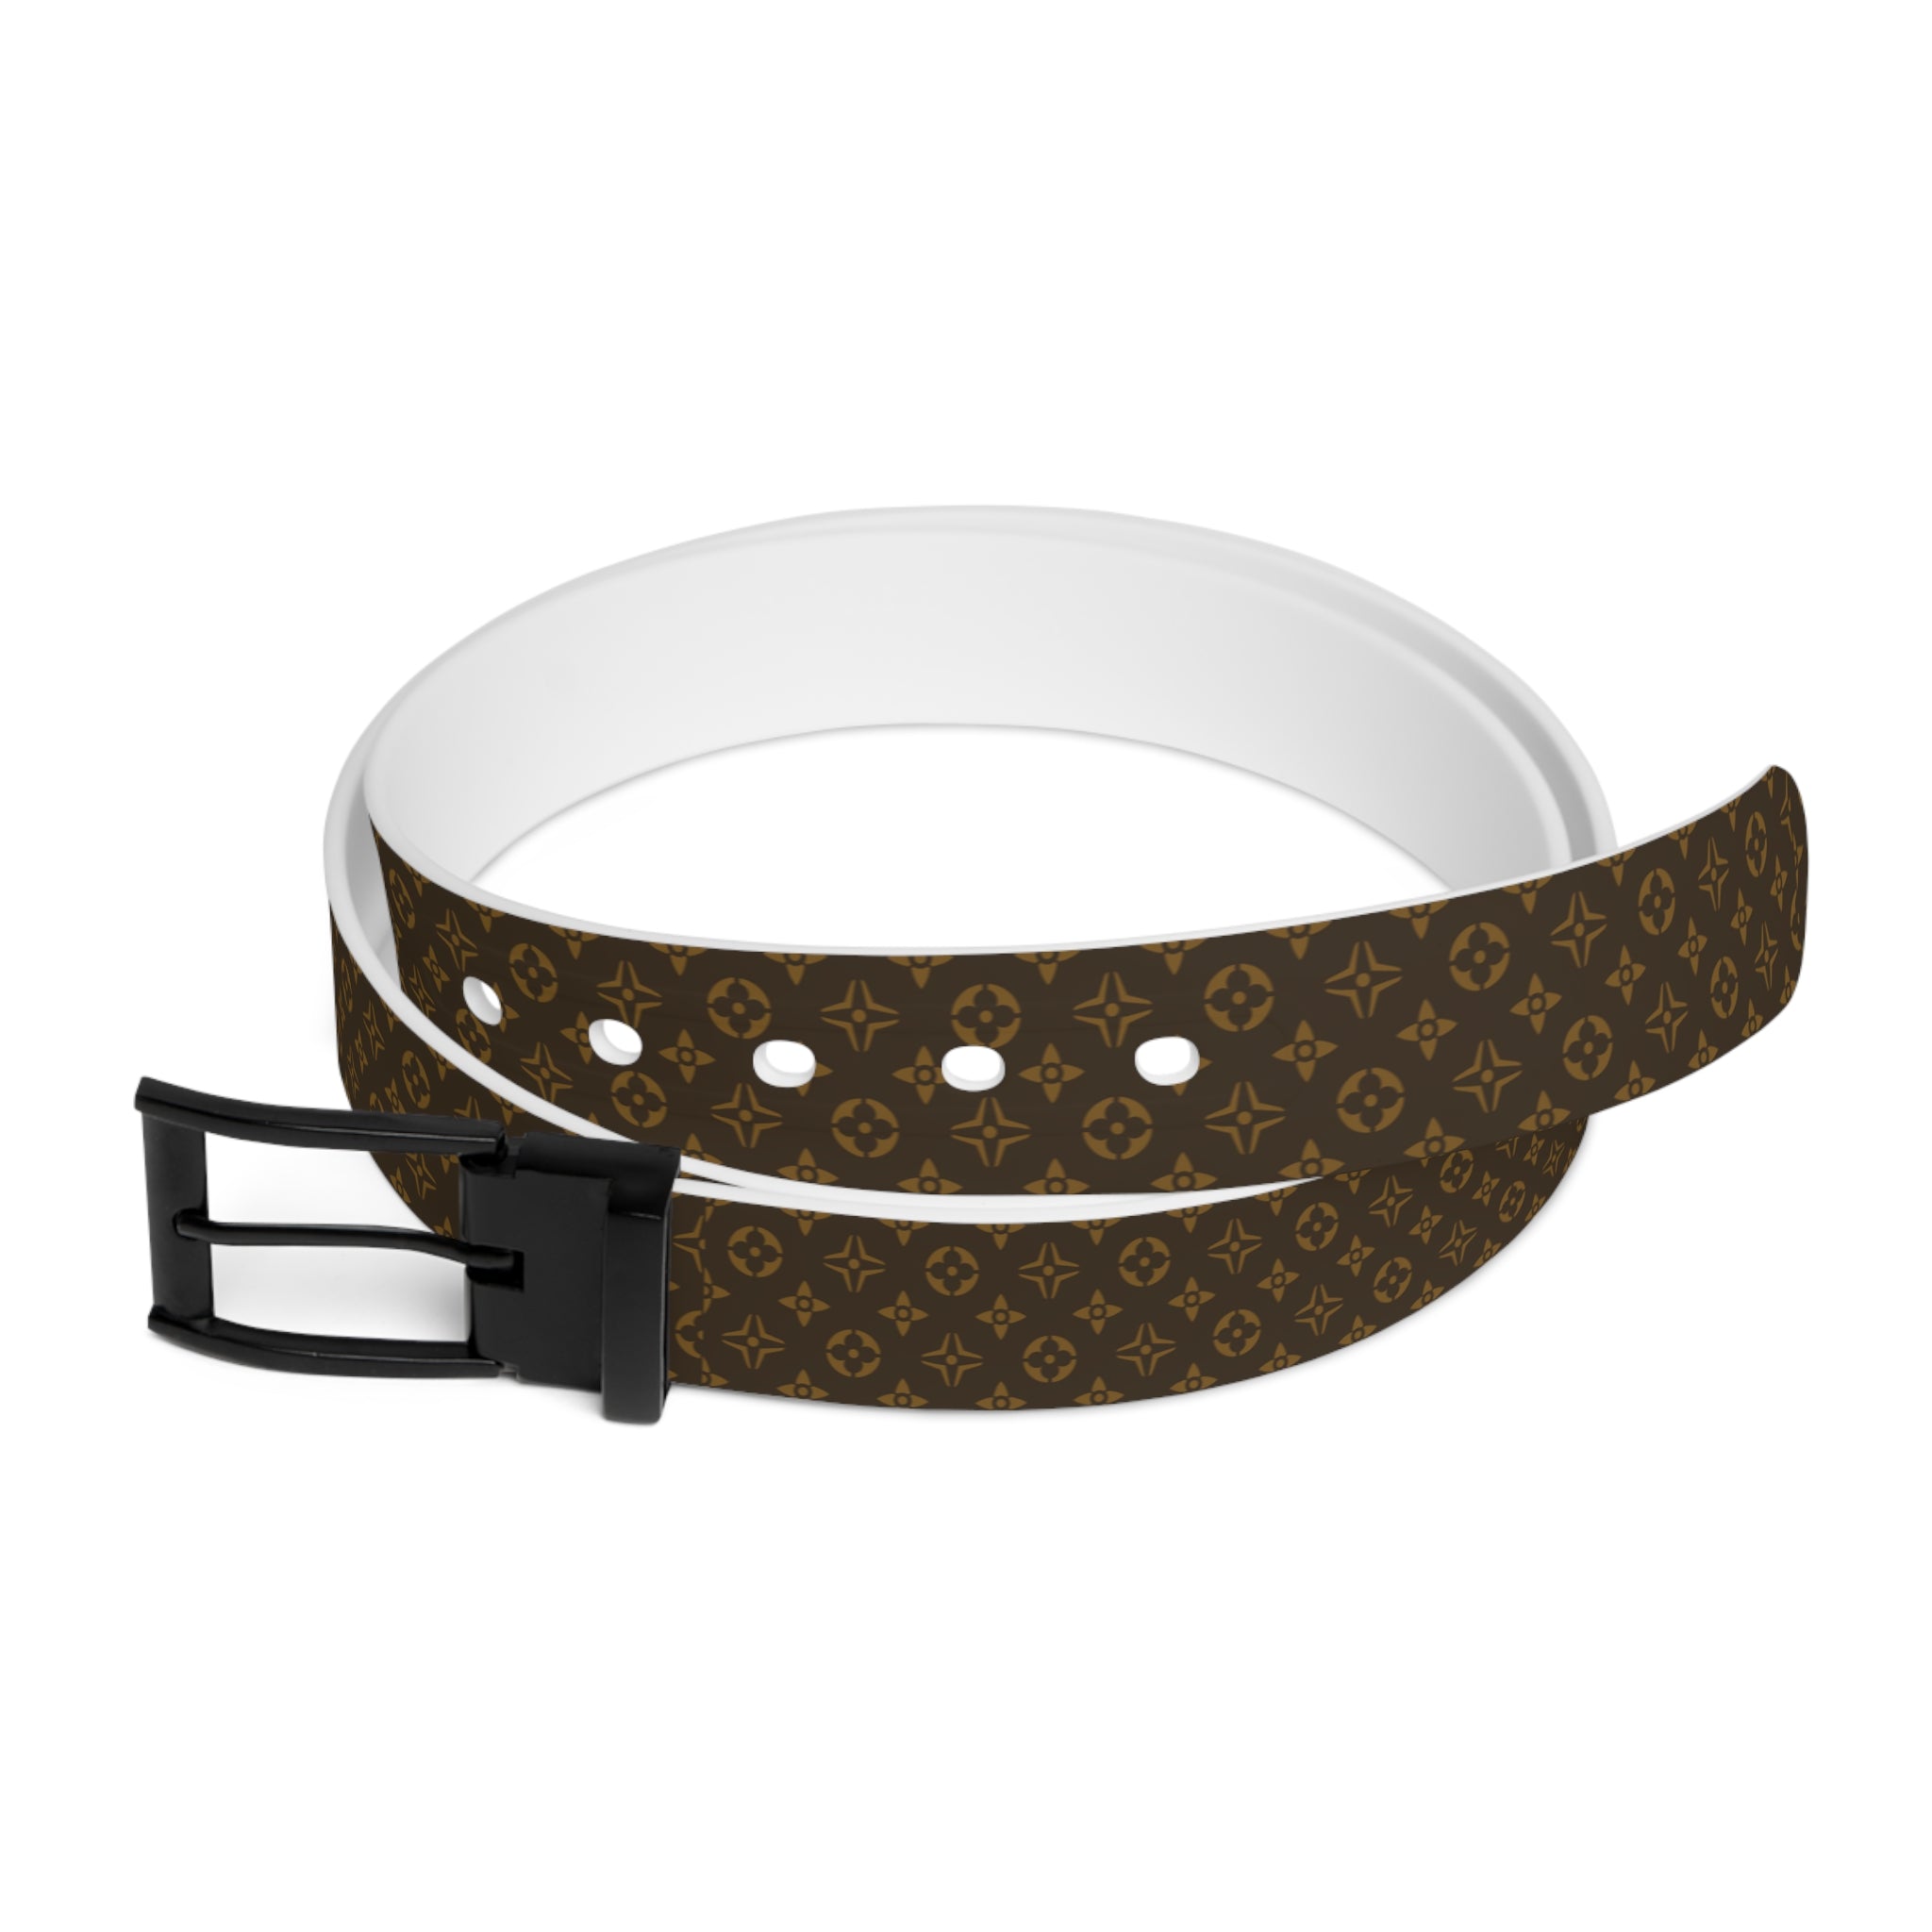 Brown Icons in Brown and Gold Unisex Fashion Belt, Luxury Women's Belt, Men's Belt, Cut-to-size Belt Accessories Black-Metal-50 The Middle Aged Groove